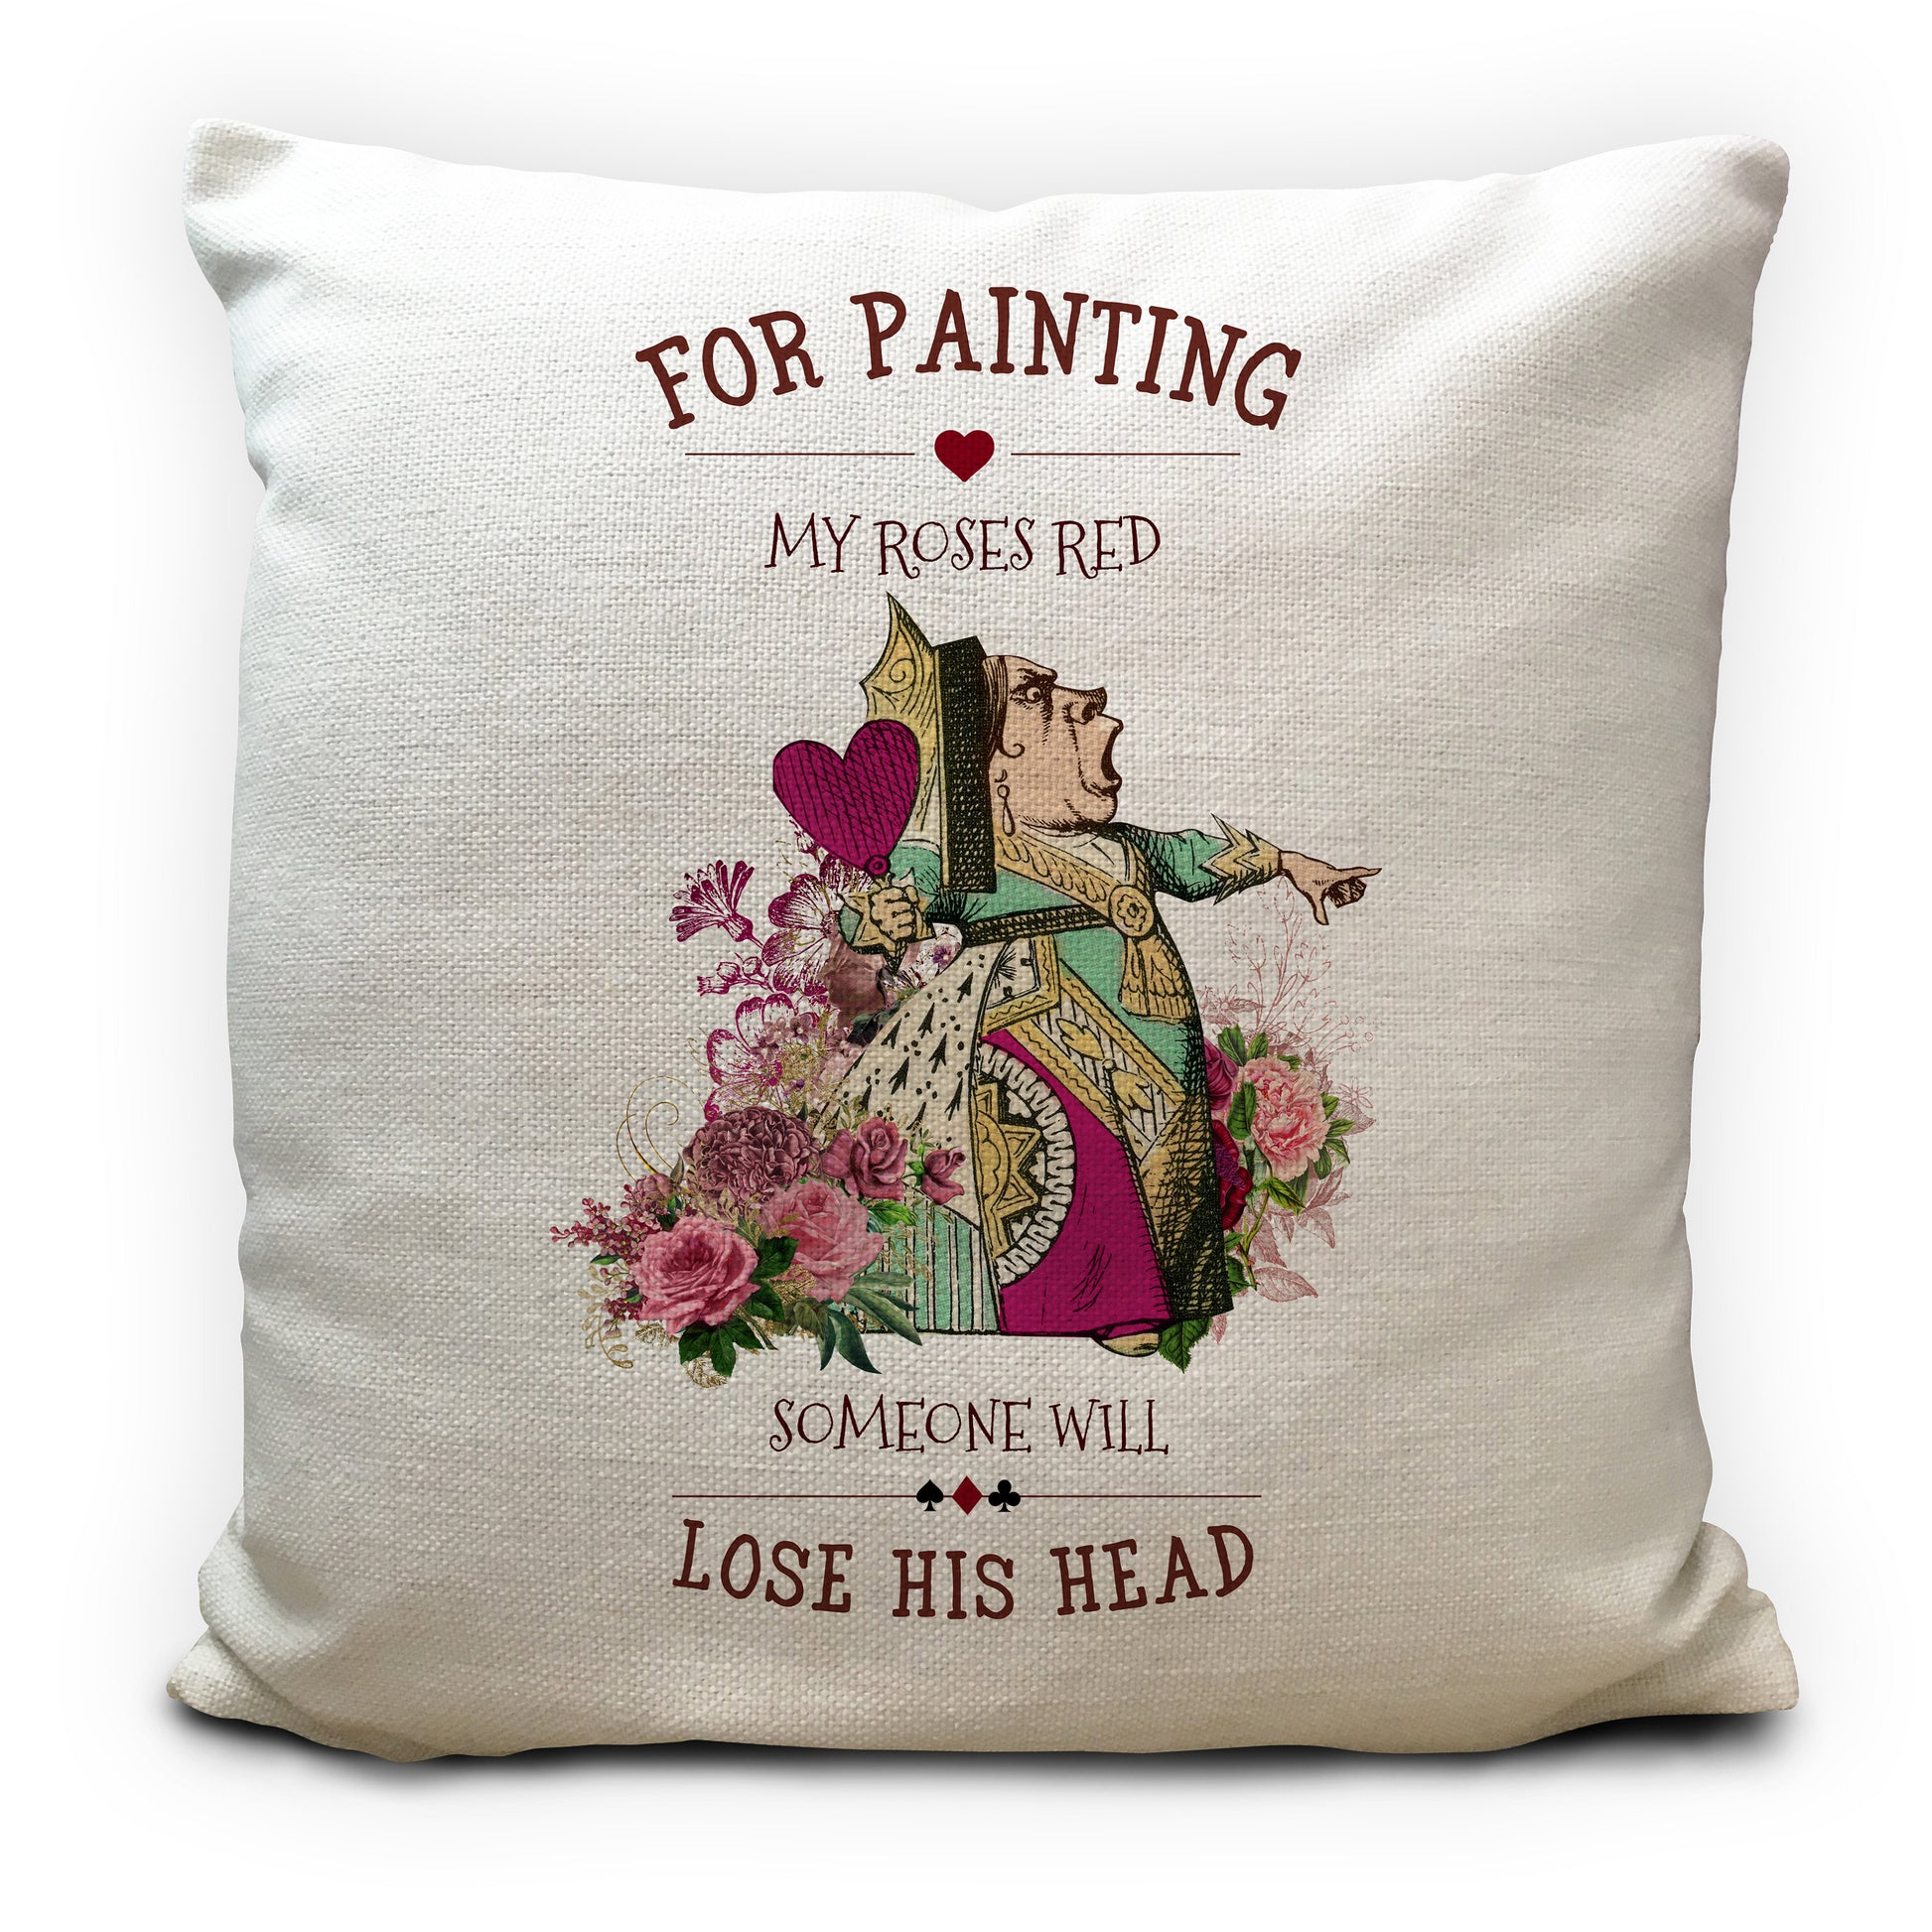 Alice in wonderland cushion cover with queen of hearts illustration